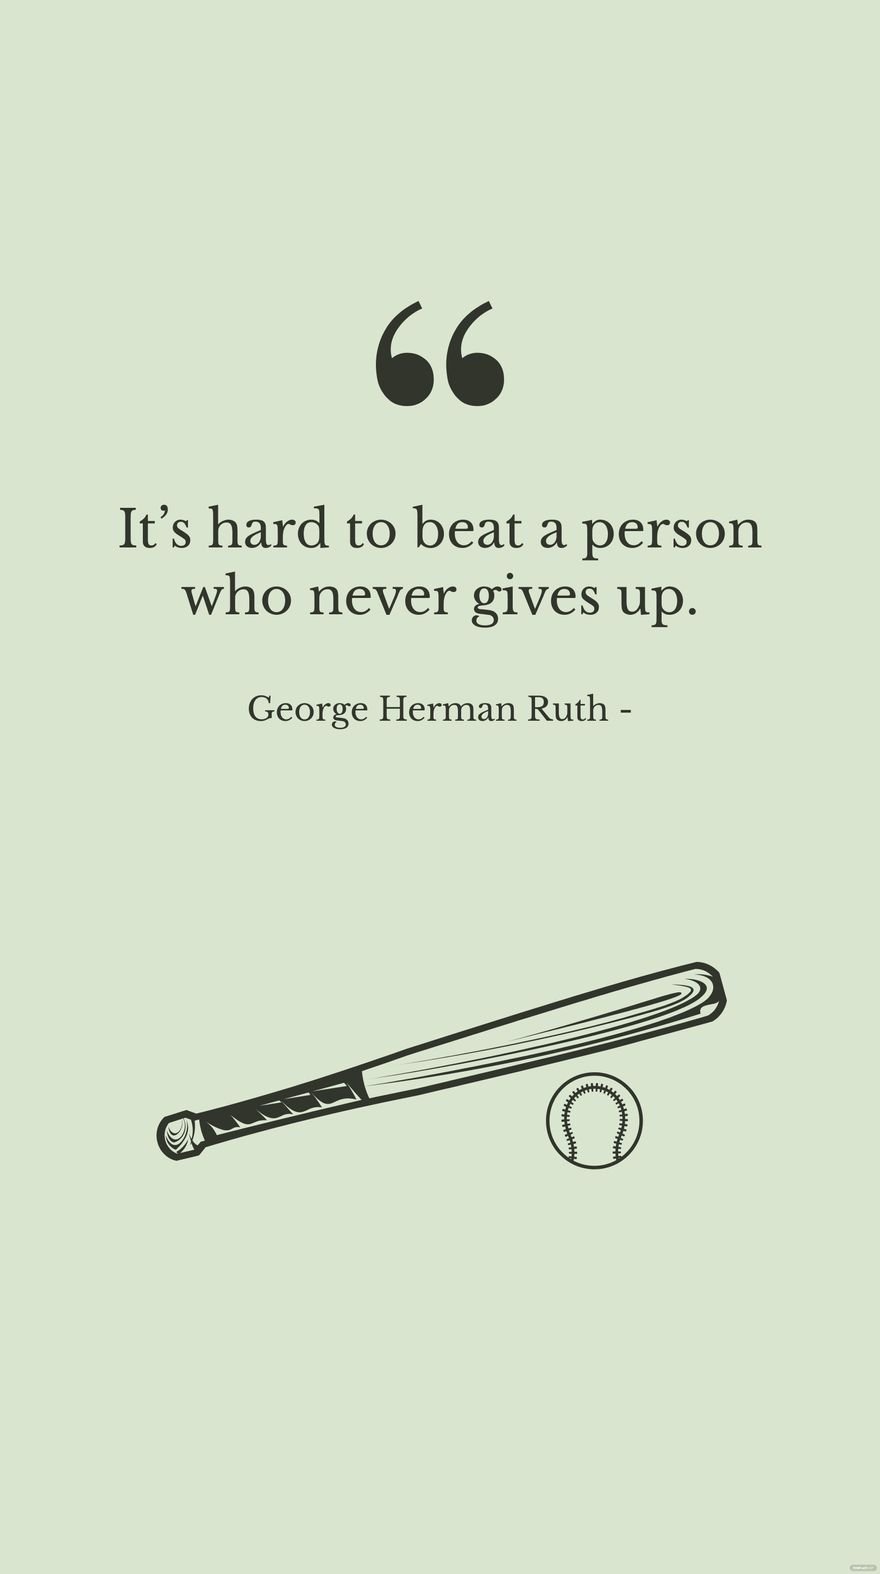 George Herman Ruth - It’s hard to beat a person who never gives up. in JPG